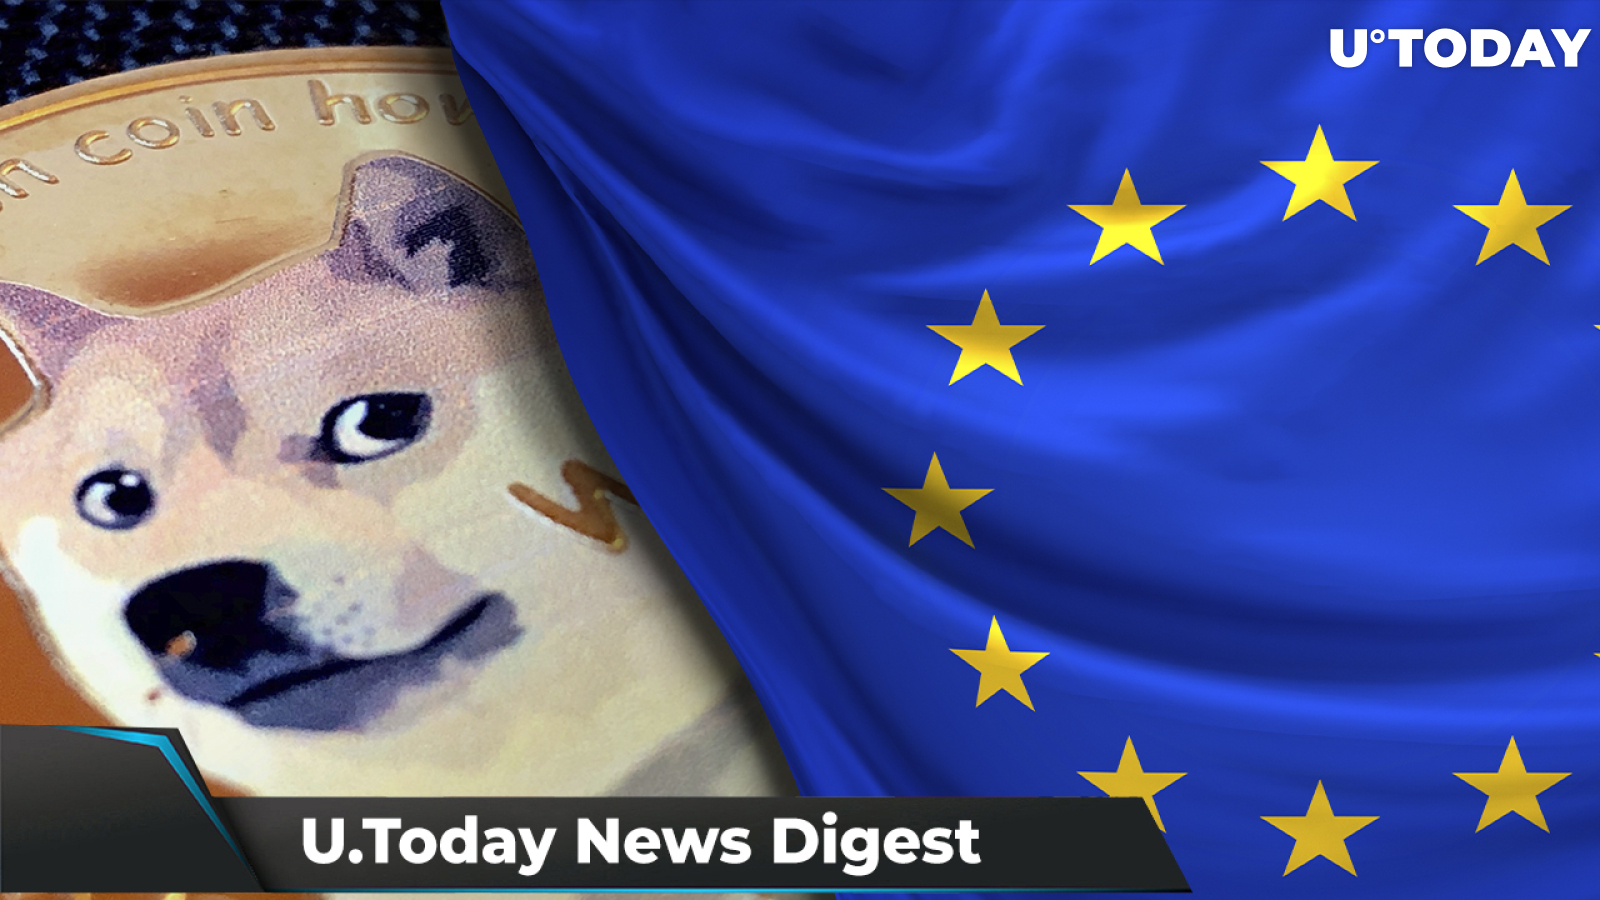 EU Parliament Votes to Ban Anonymity in Crypto, DOGE Co-Founder Slams SHIB’s Metaverse: Crypto News Digest by U.Today